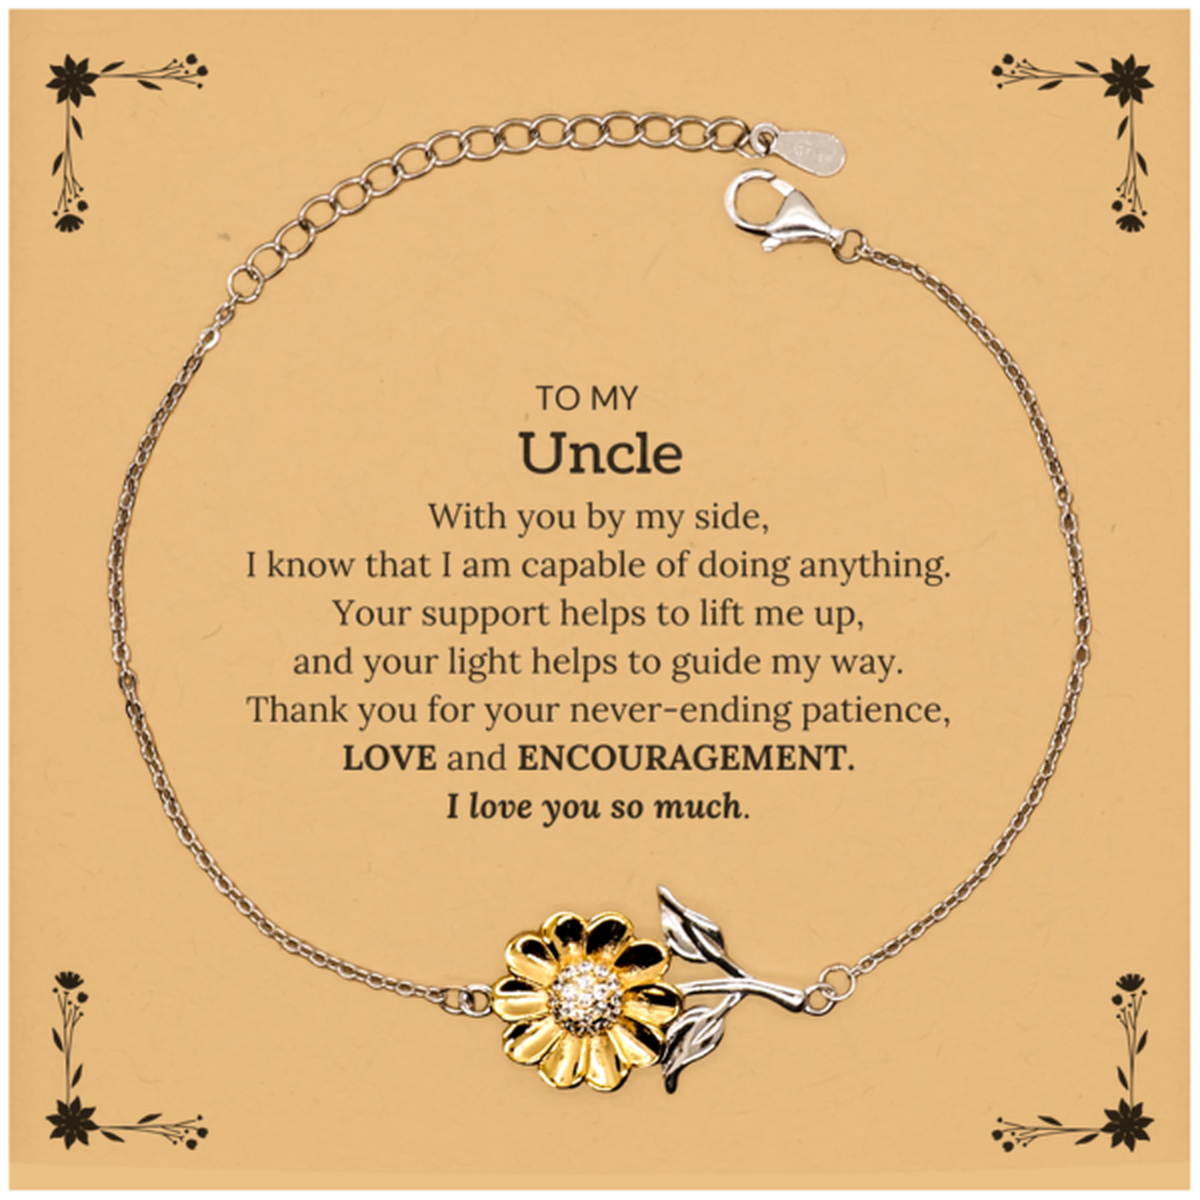 Appreciation Uncle Sunflower Bracelet Gifts, To My Uncle Birthday Christmas Wedding Keepsake Gifts for Uncle With you by my side, I know that I am capable of doing anything. I love you so much